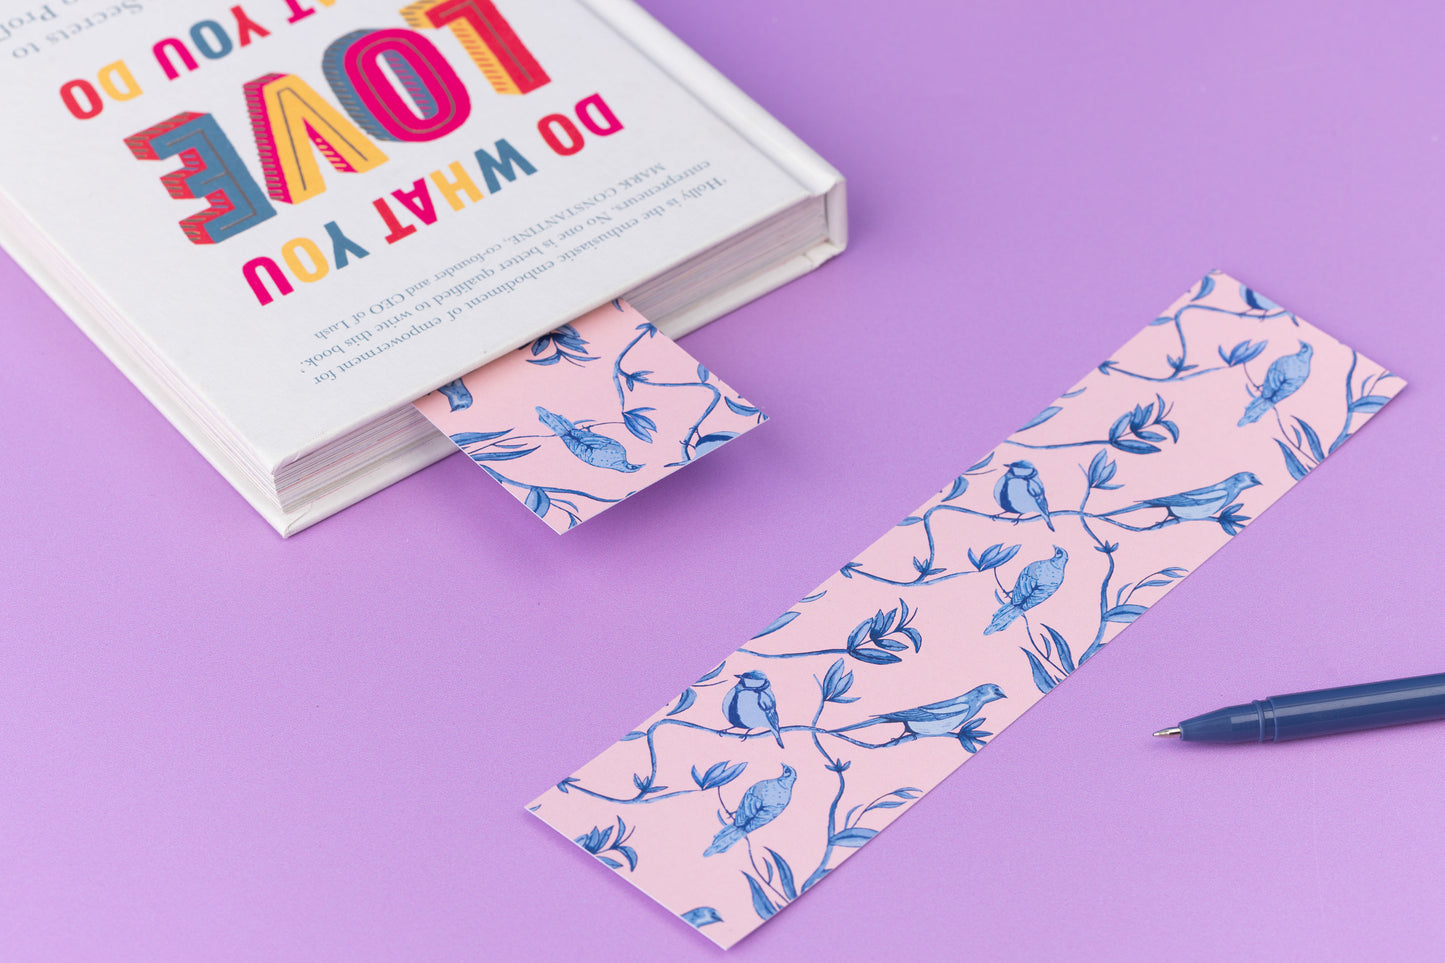 Brighton Birds double-sided bookmark is full-colour pattern side up on a lilac desk.  To its left is a closed book which has the same bookmark sticking out the top.